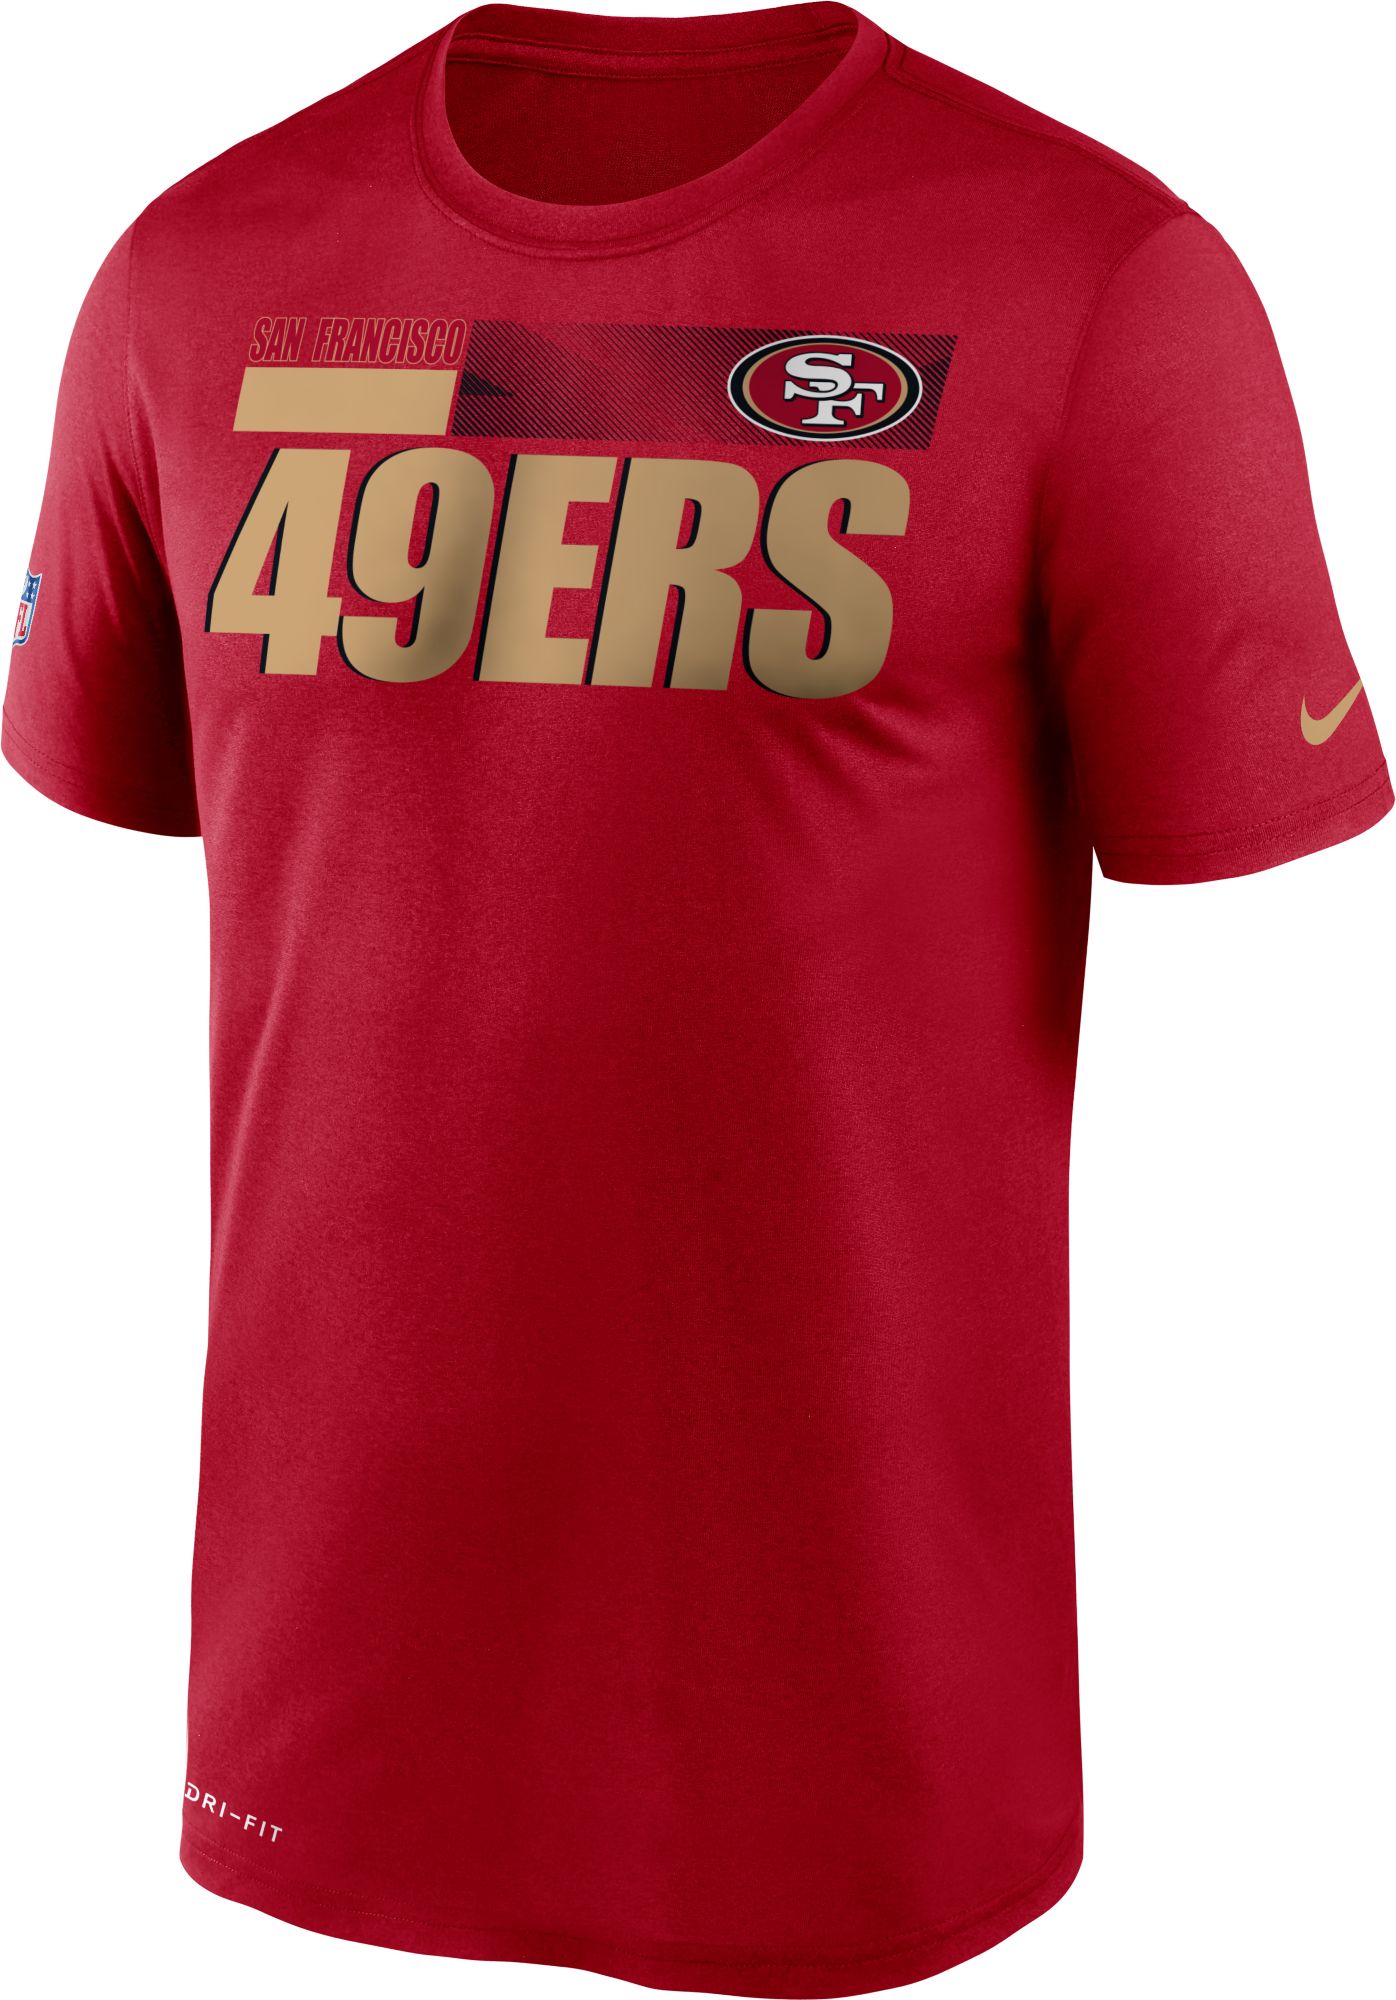 authentic 49ers gear